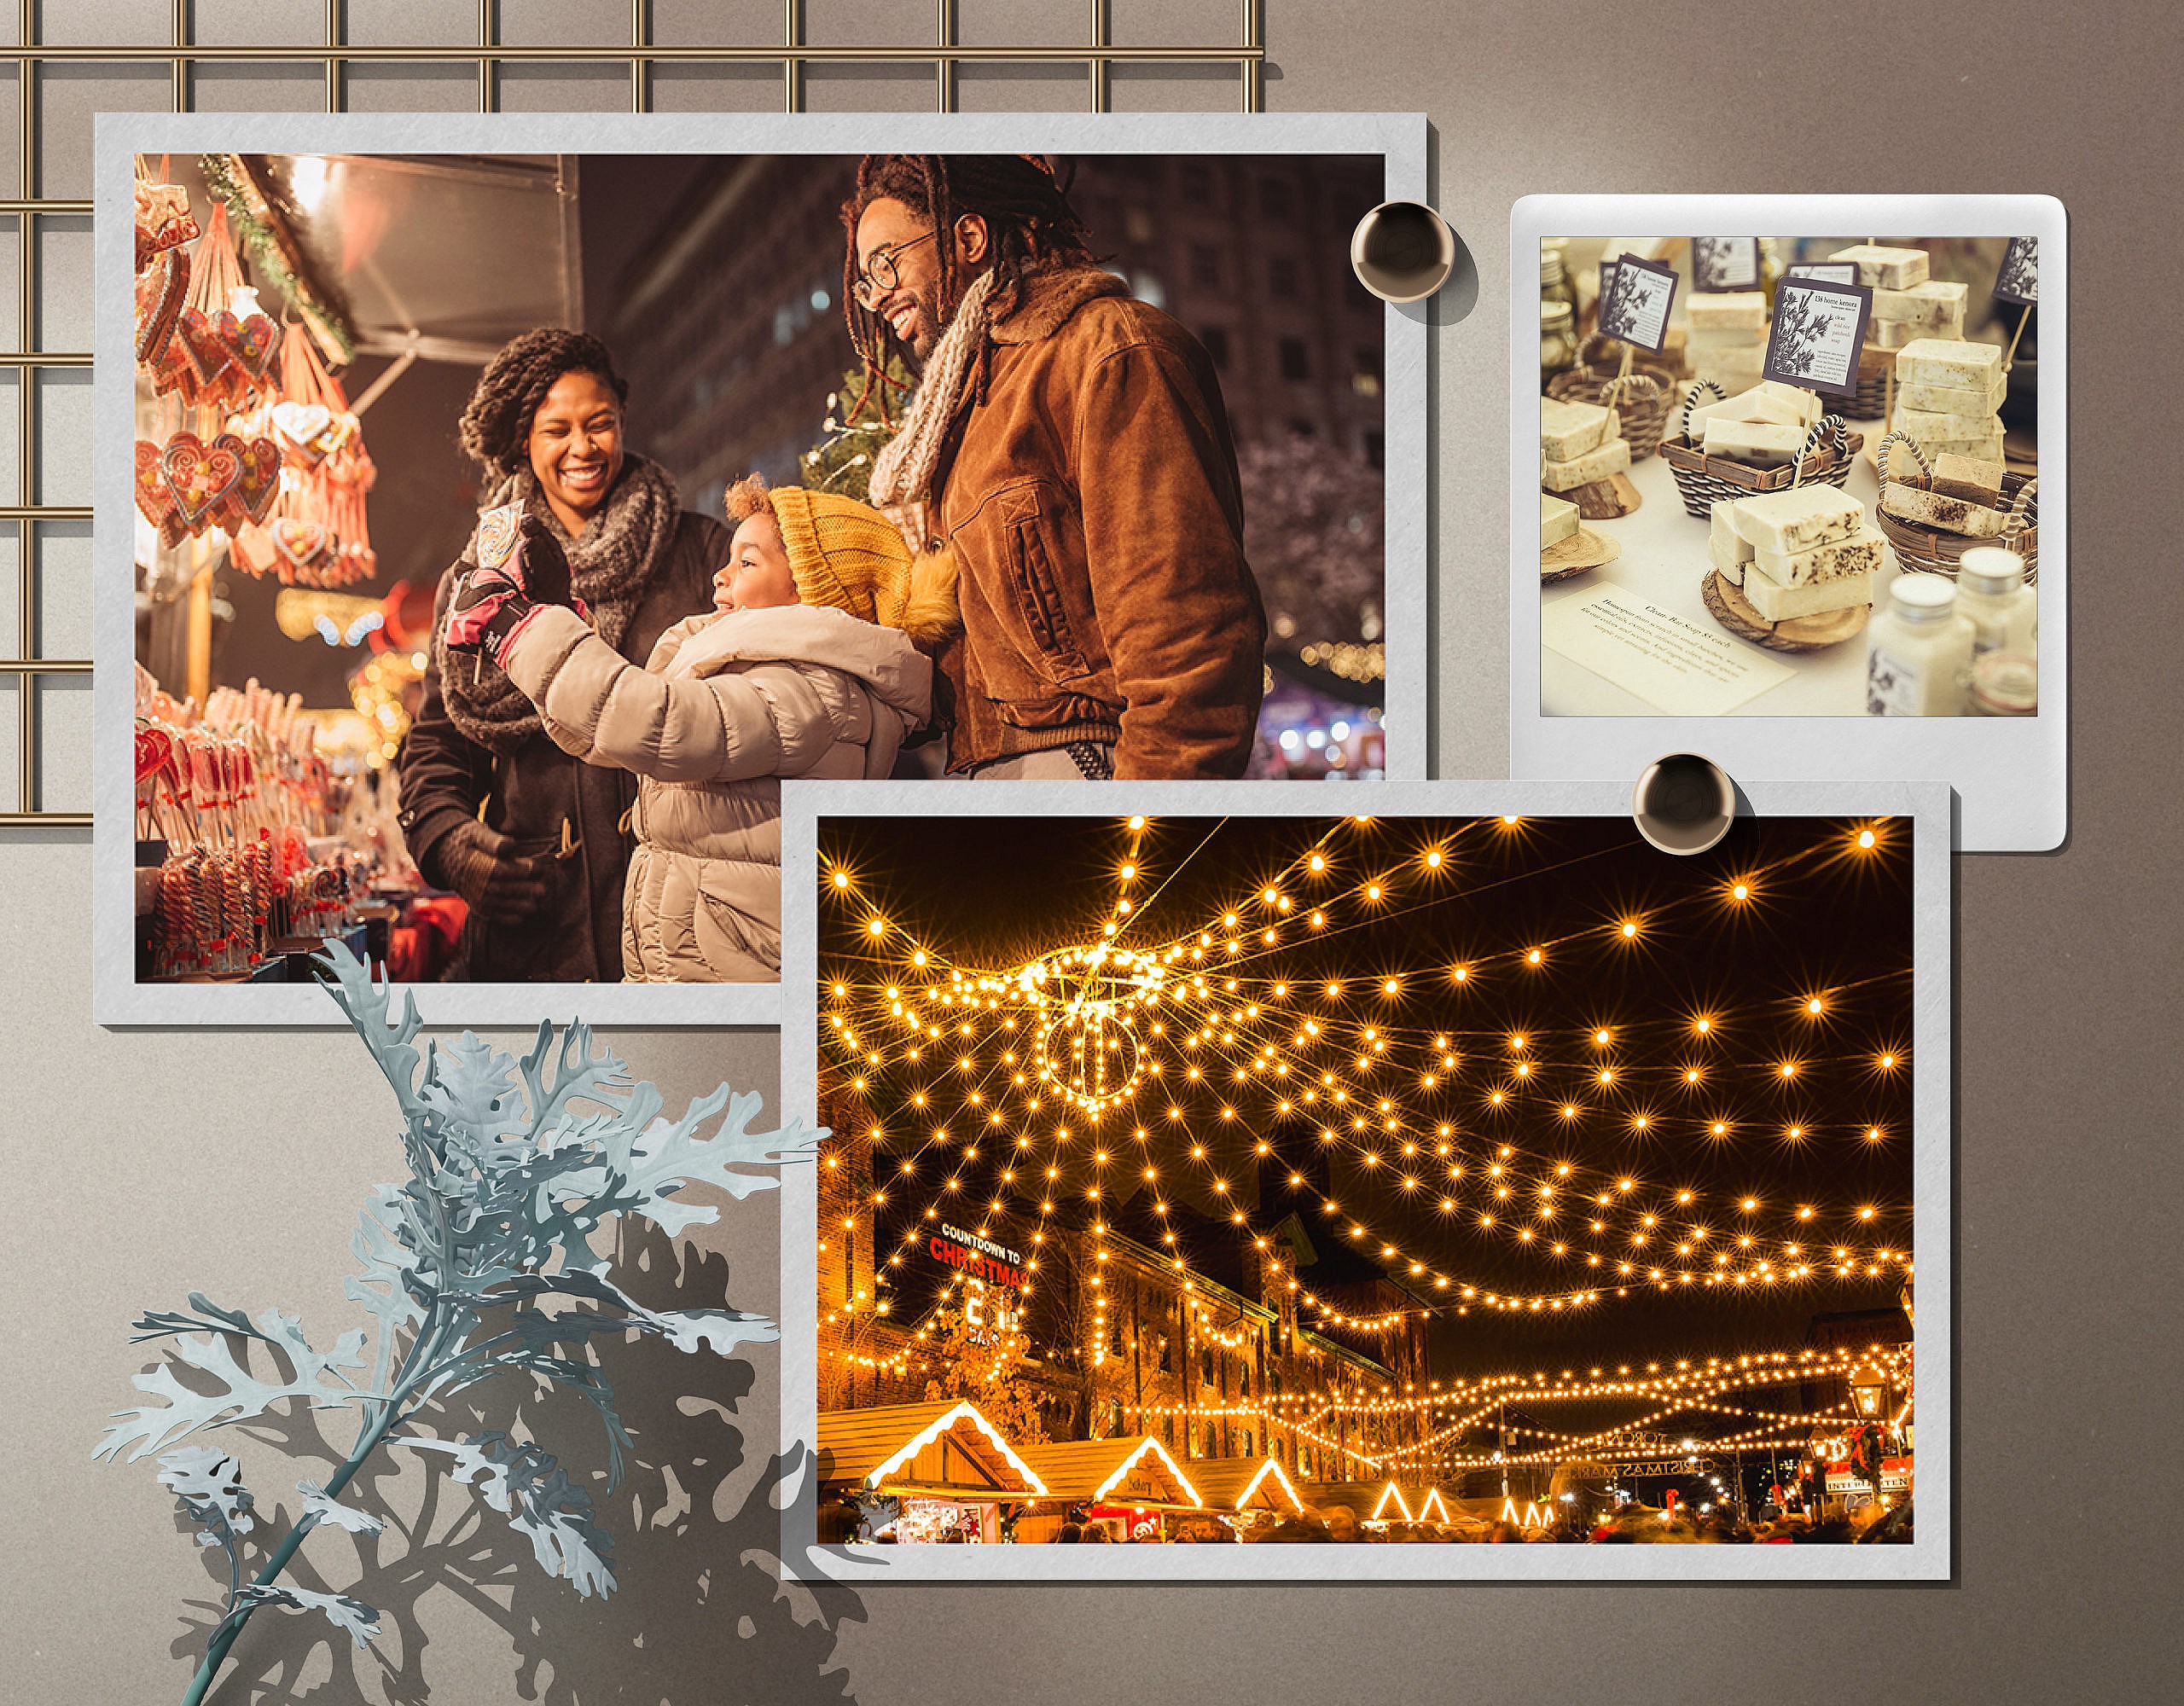 A collage of three images—a family of three at a holiday market at night, a selection of cheeses, and a winter-themed light festival at night.